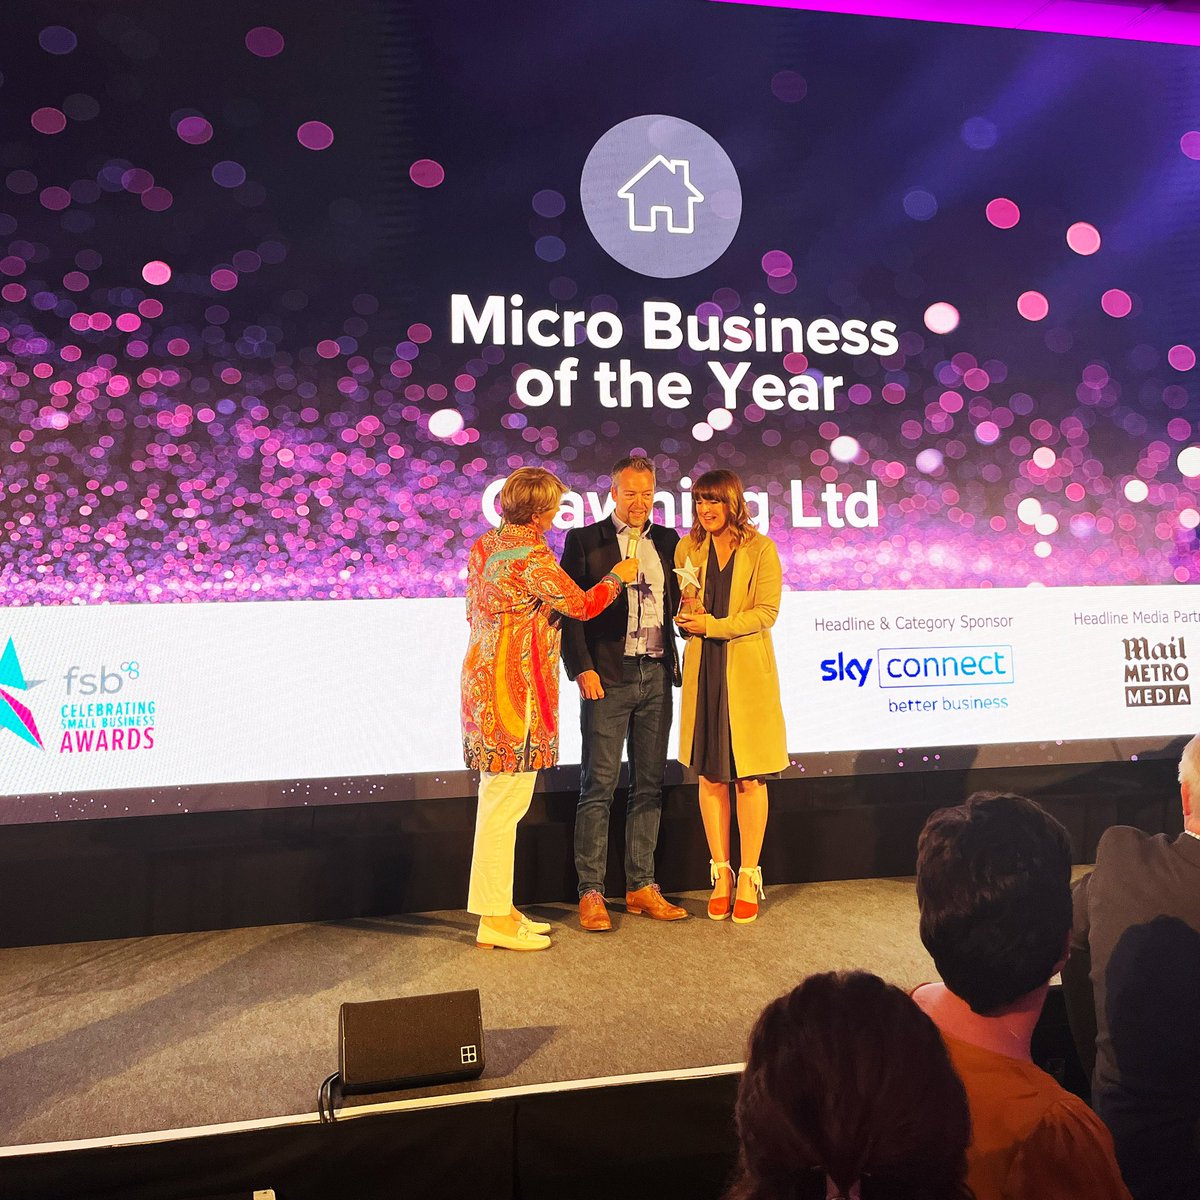 Congratulations to our first FSB Awards winner of the day - @glawning from @FSBNorthYorks who has won our Micro Business of the Year award, sponsored by Sky Connect. Congratulations, Glawning 🎉 #FSBawards